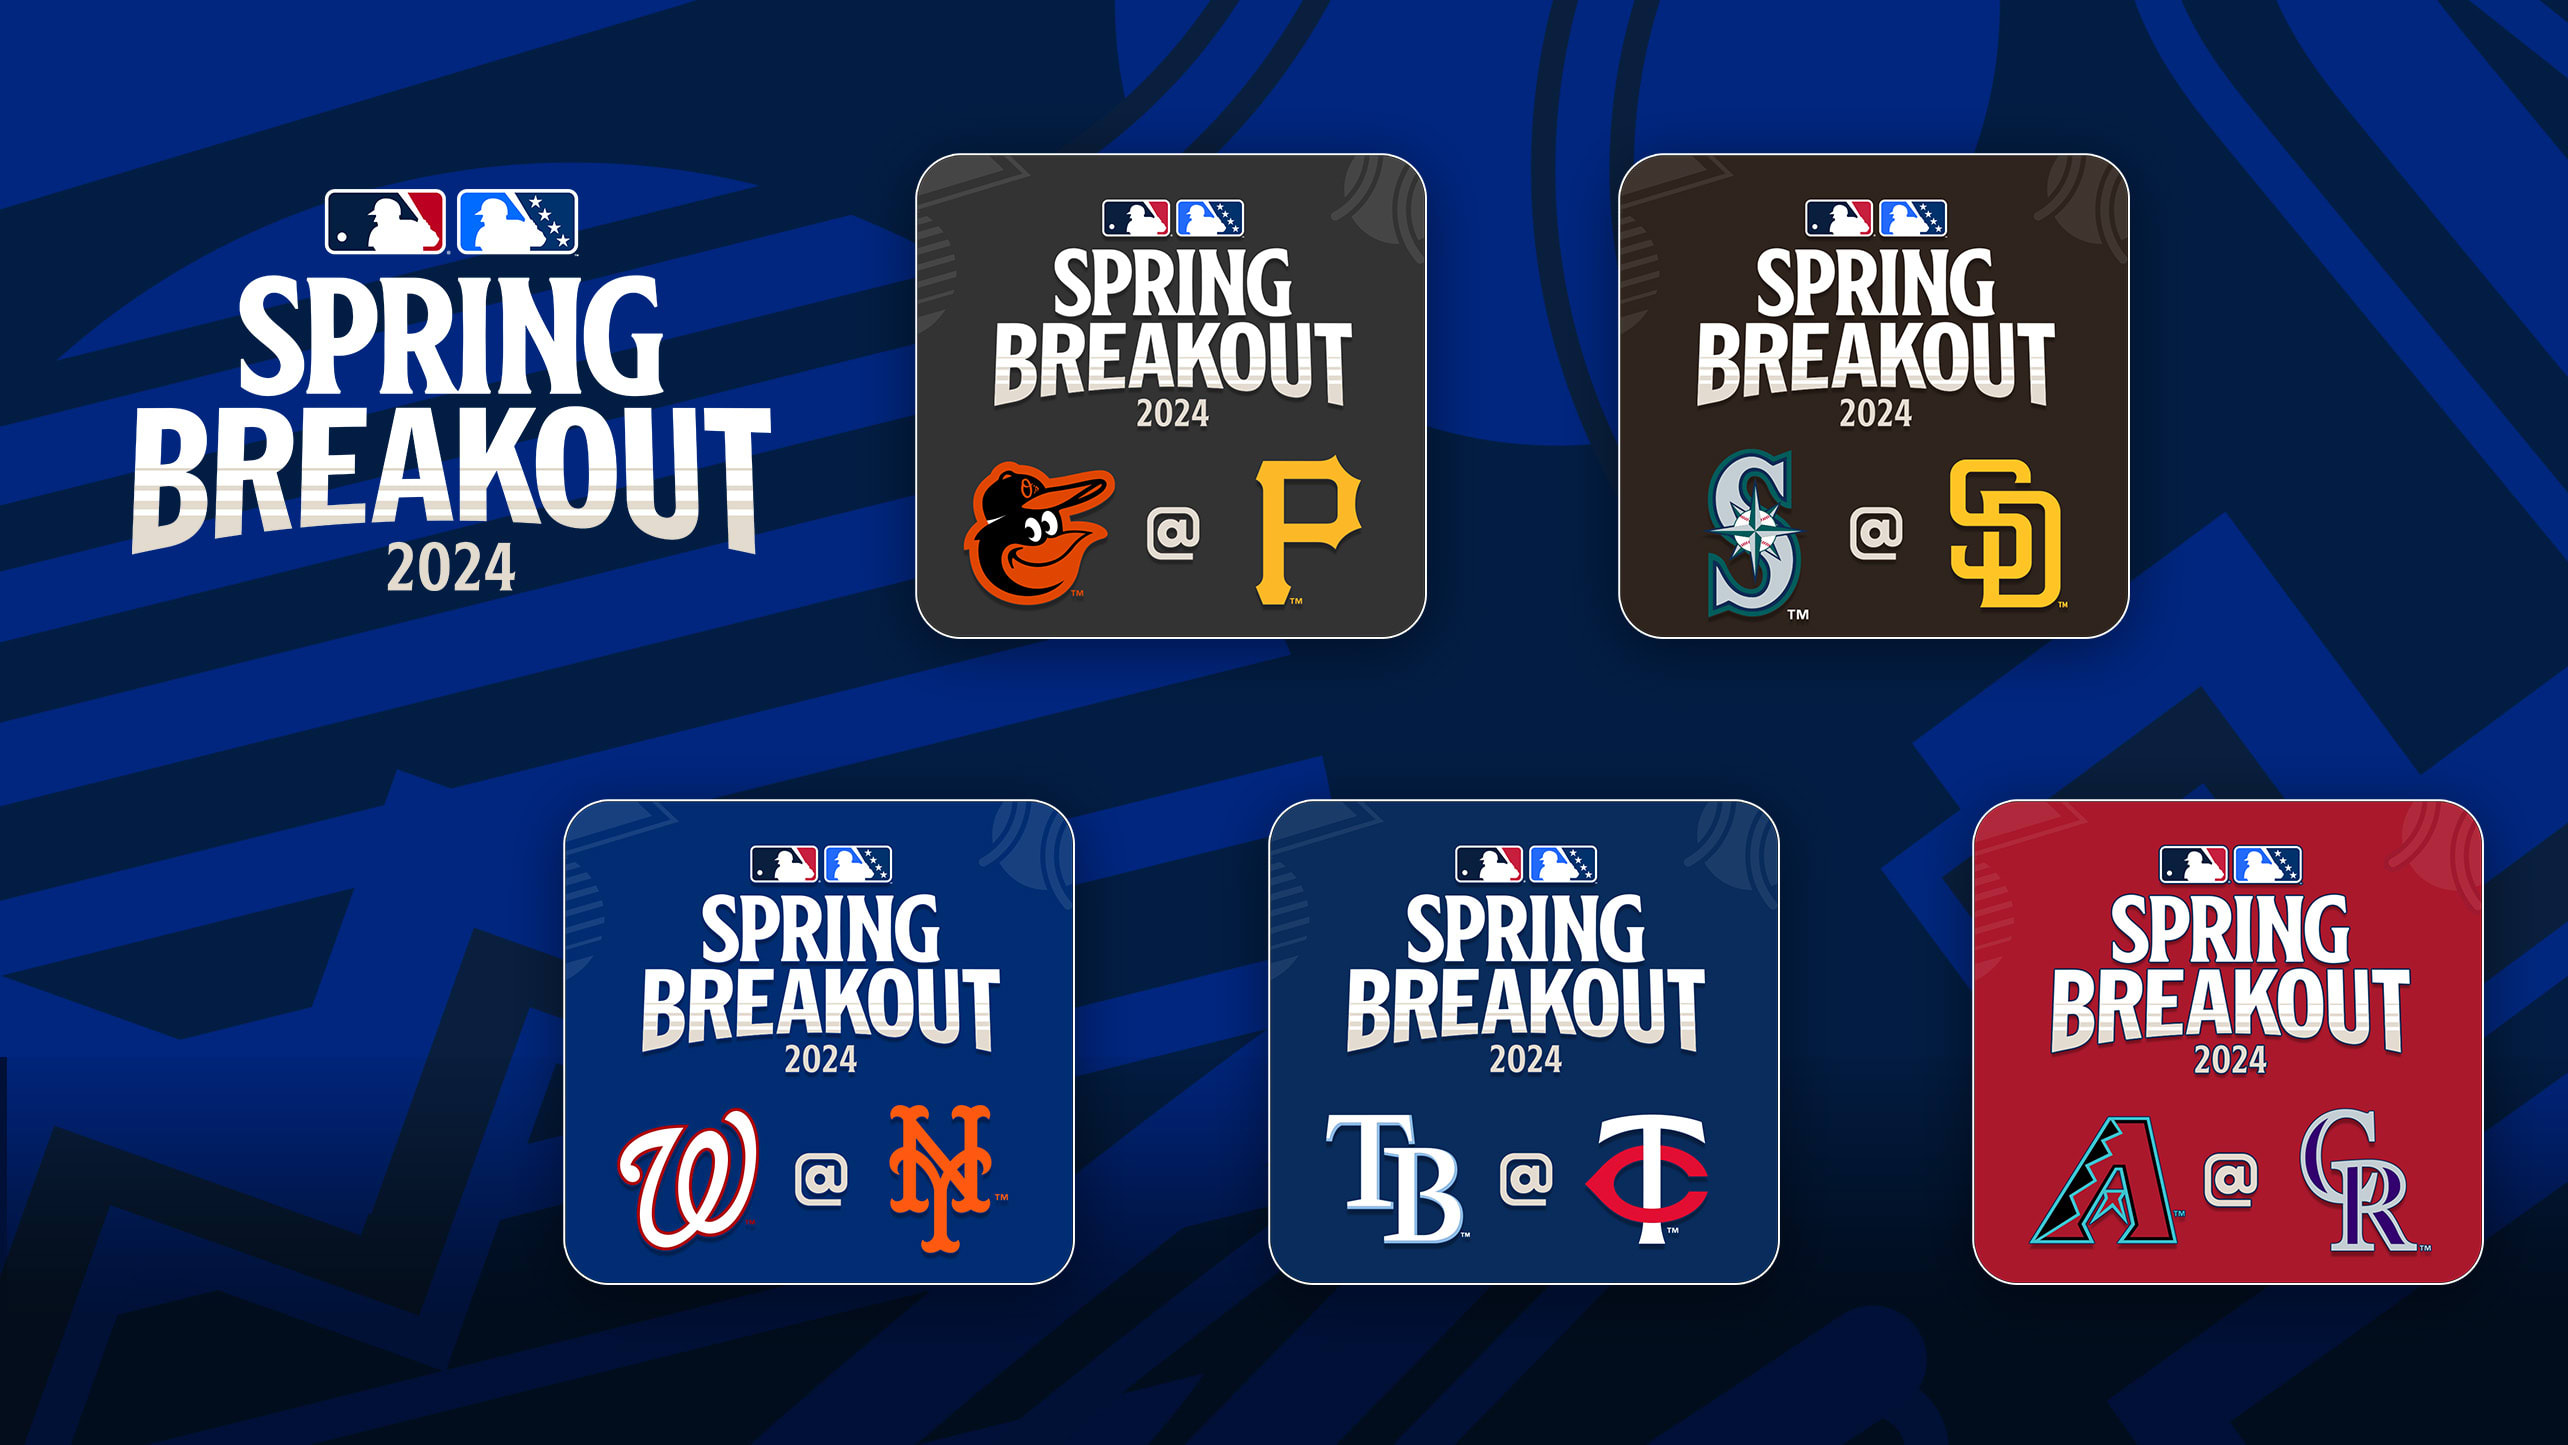 5 of the best team matchups in Spring Breakout